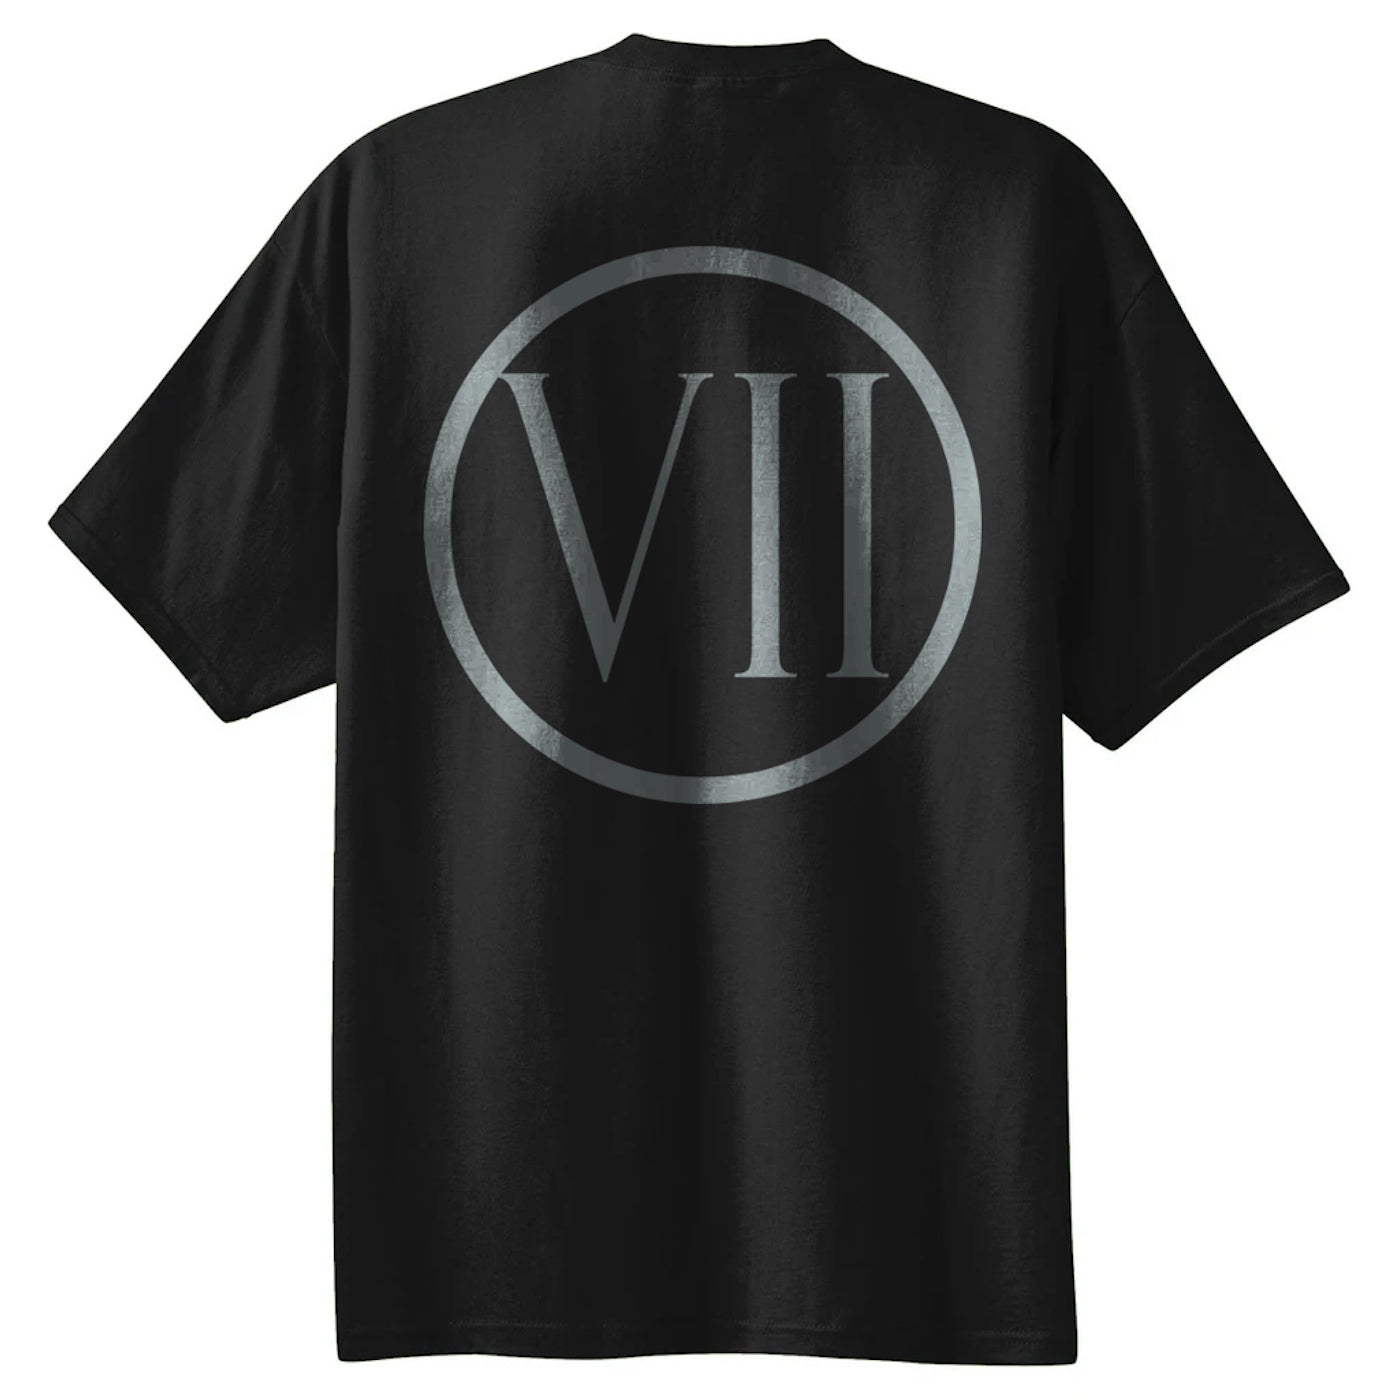 Darkness Everywhere "The Seventh Circle" T-Shirt